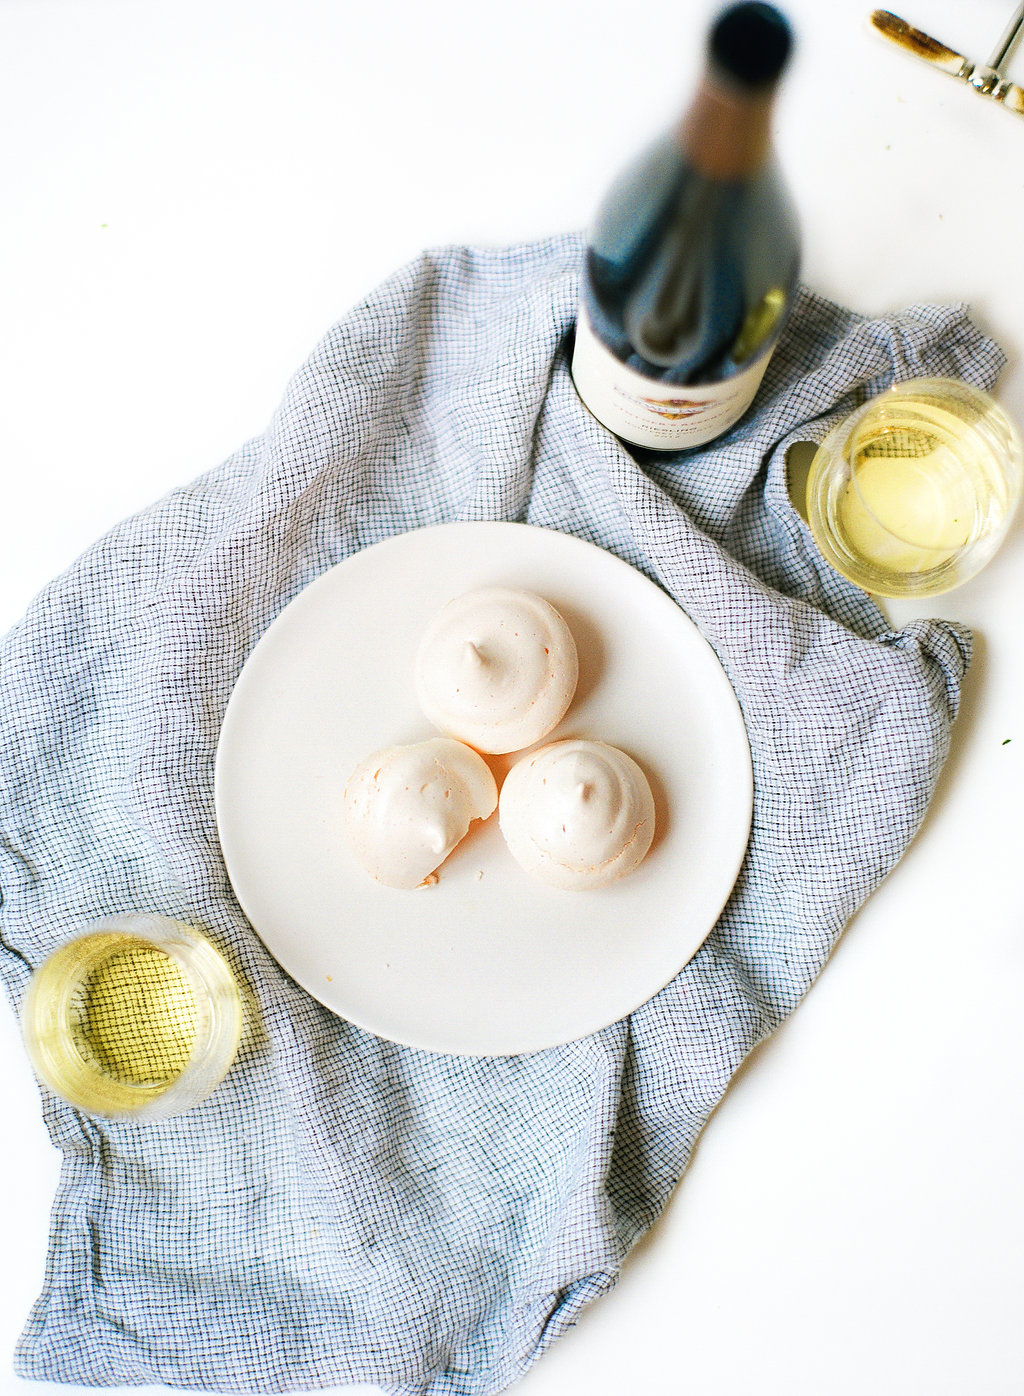 These Cuban meringues are delicious, adorable and wildly easy to make!